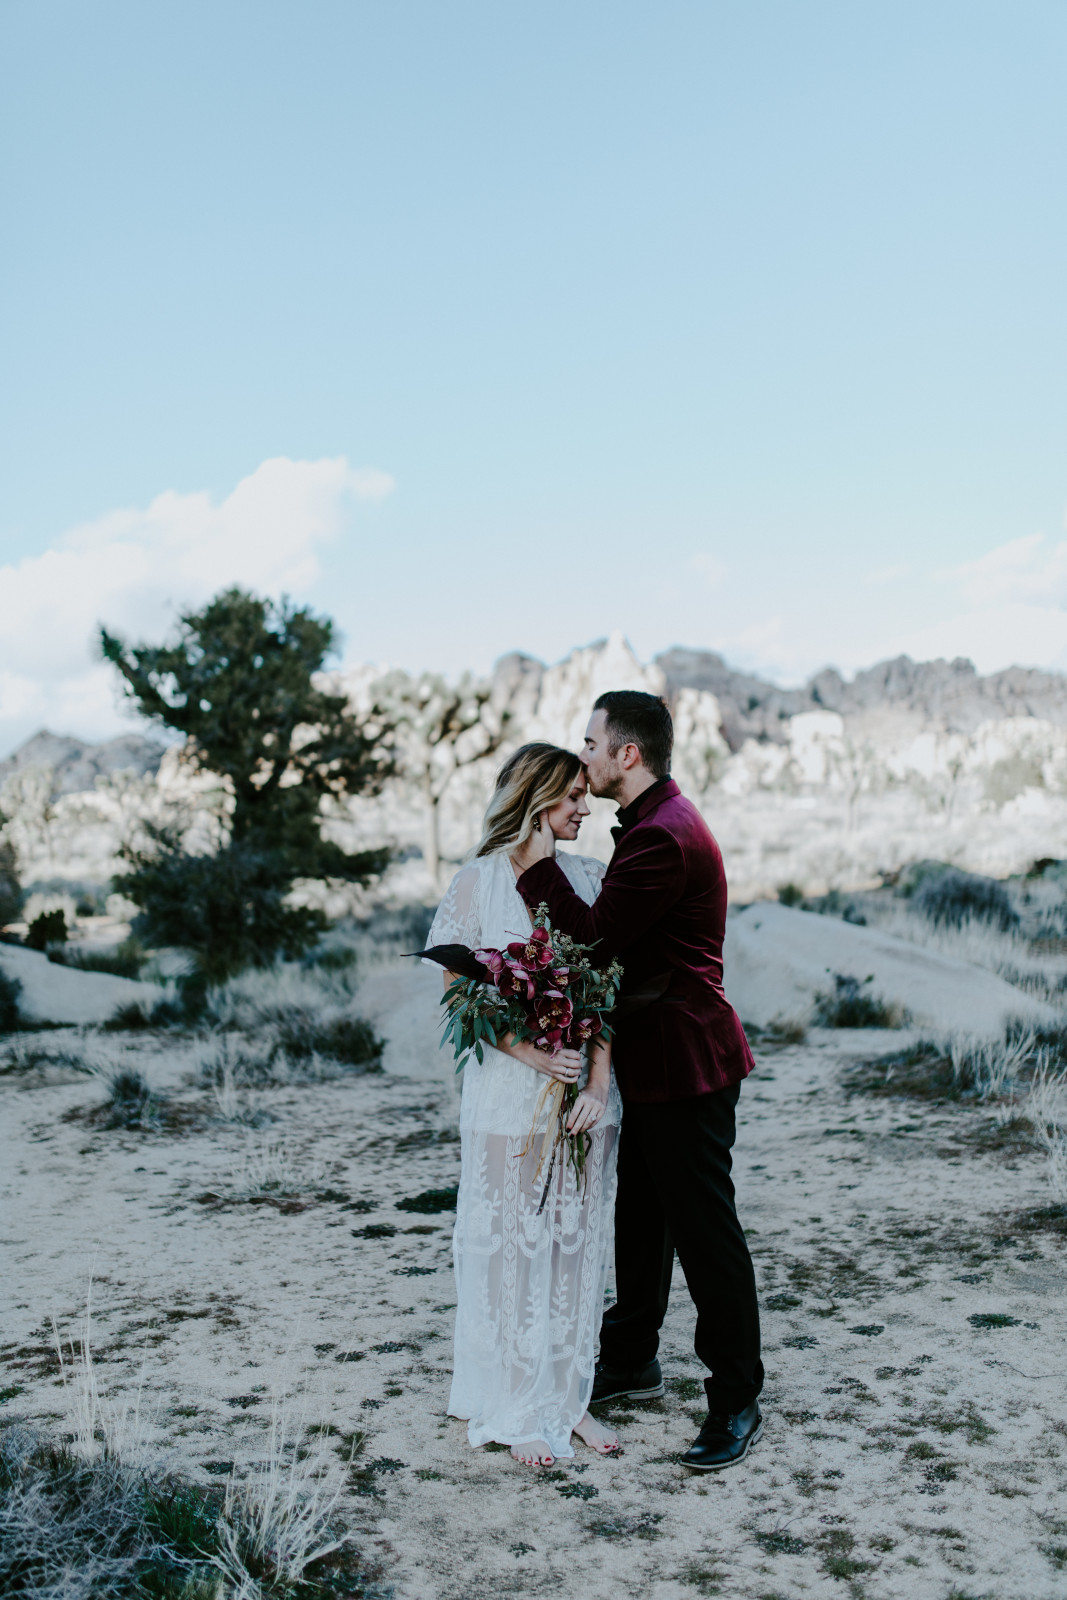 Alyssa and Jeremy face each other on the sand of Joshua Tree National Park Joshua Tree National Park, CA Elopement wedding photography at Joshua Tree National Park by Sienna Plus Josh.